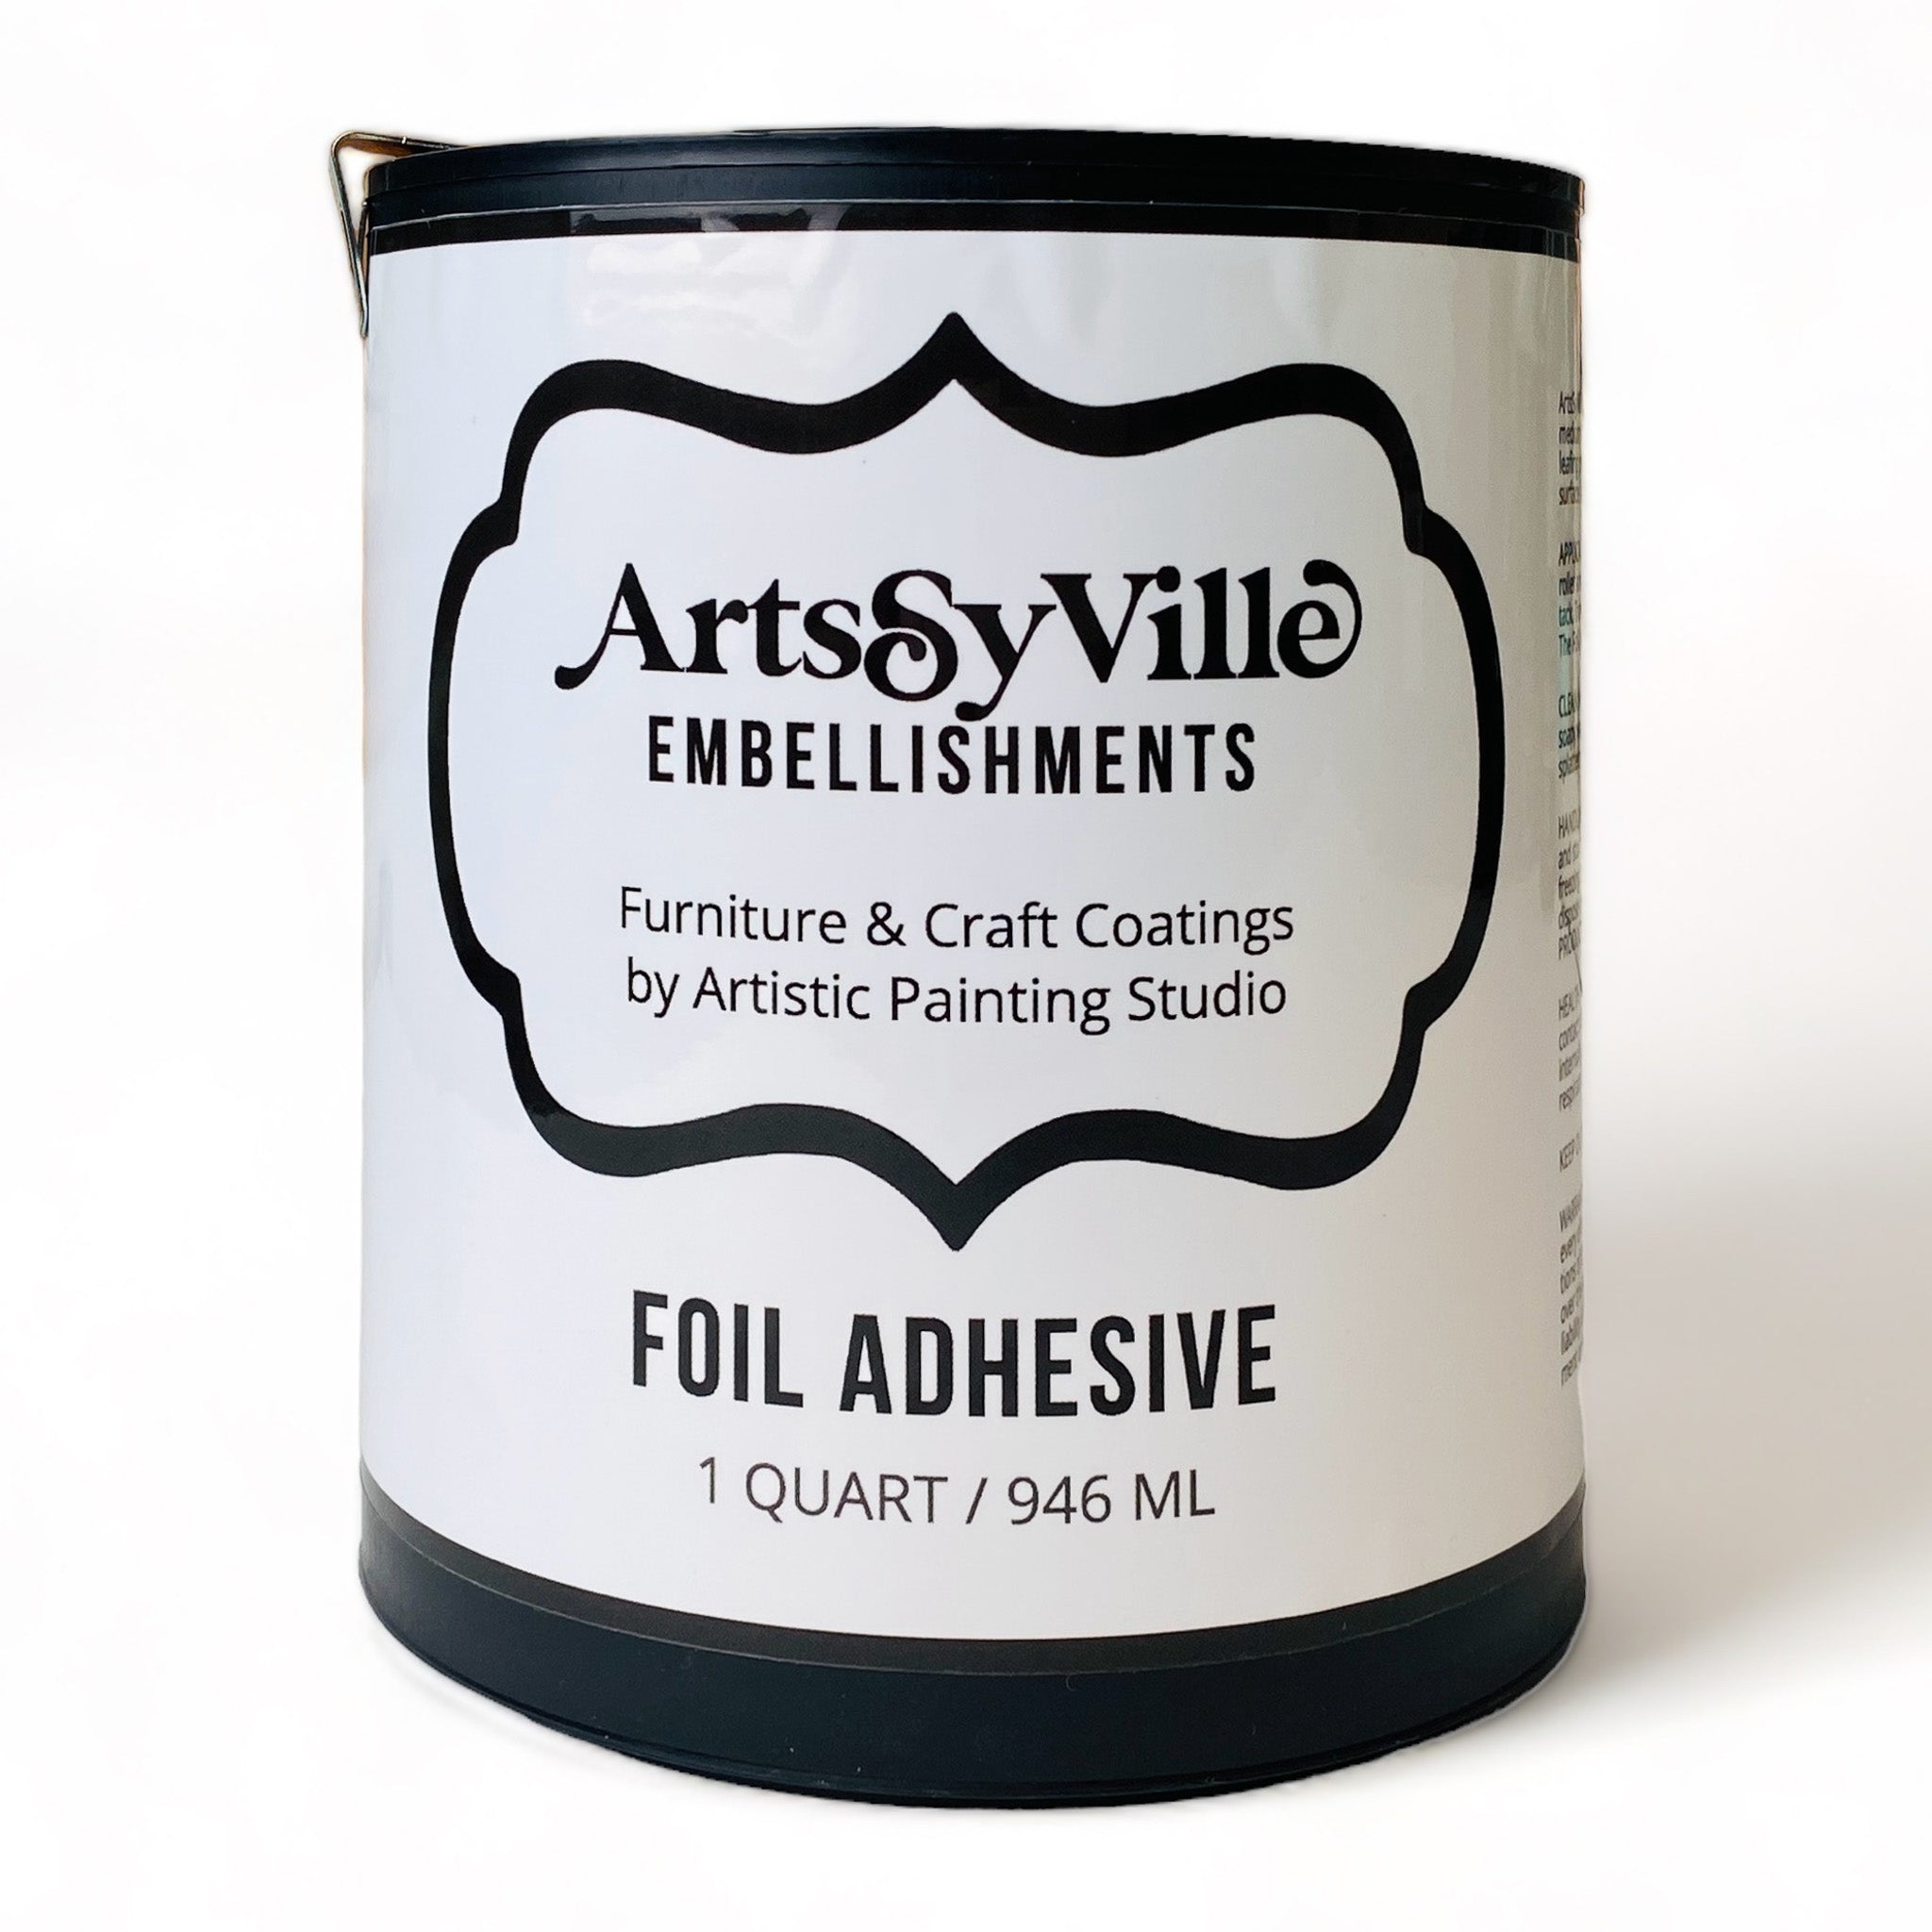 A 1 quart container of Artistic Painting Studio's Foil Adhesive is against a white background.